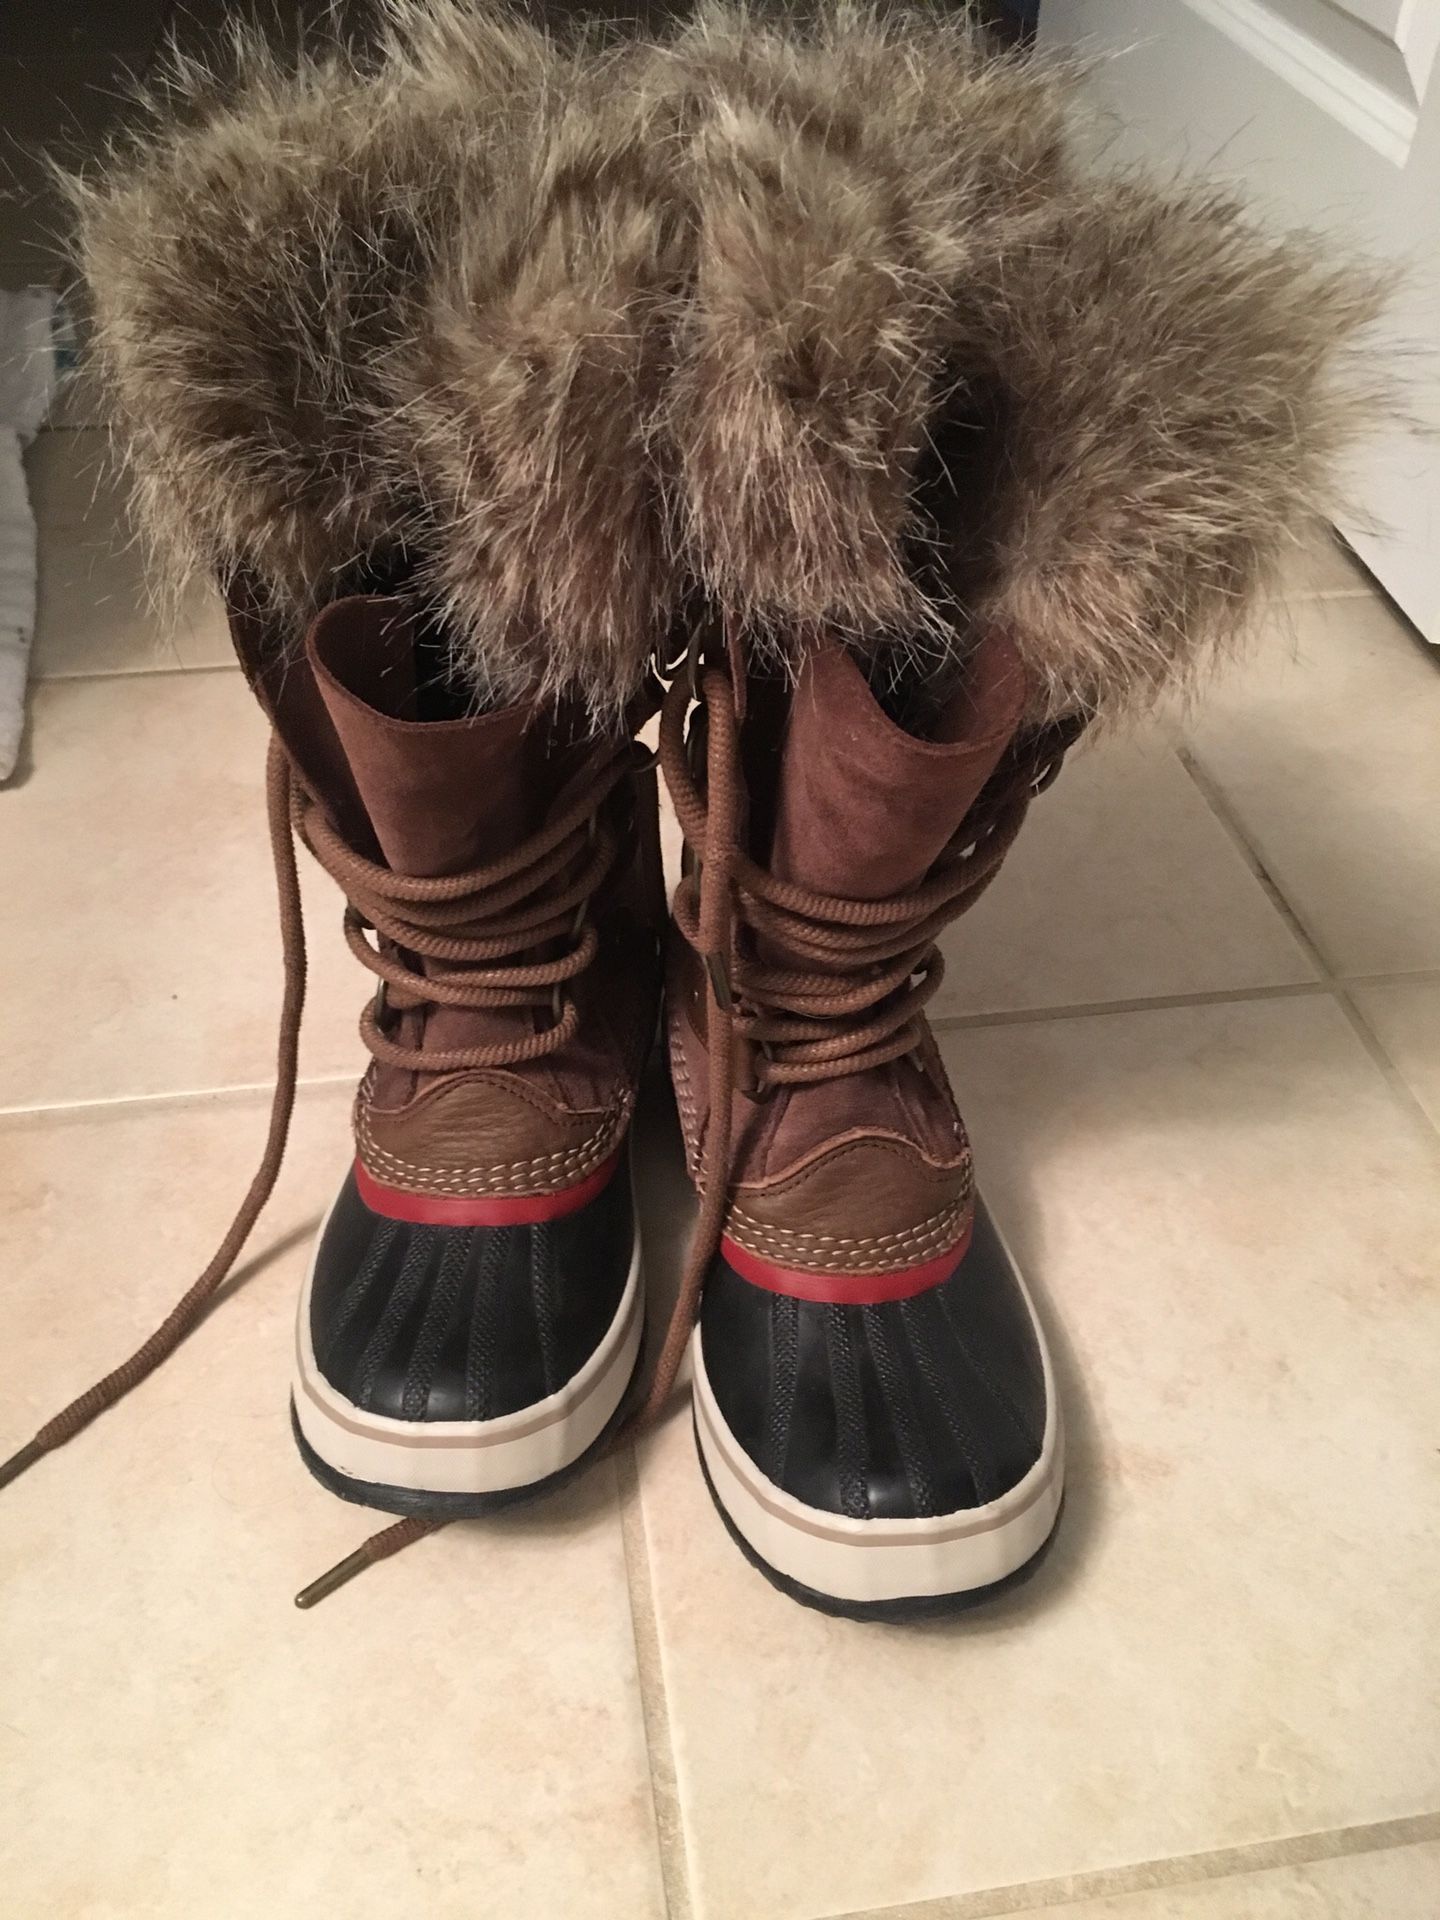 Sorel Joan of Arctic boots size 6 and 1/2